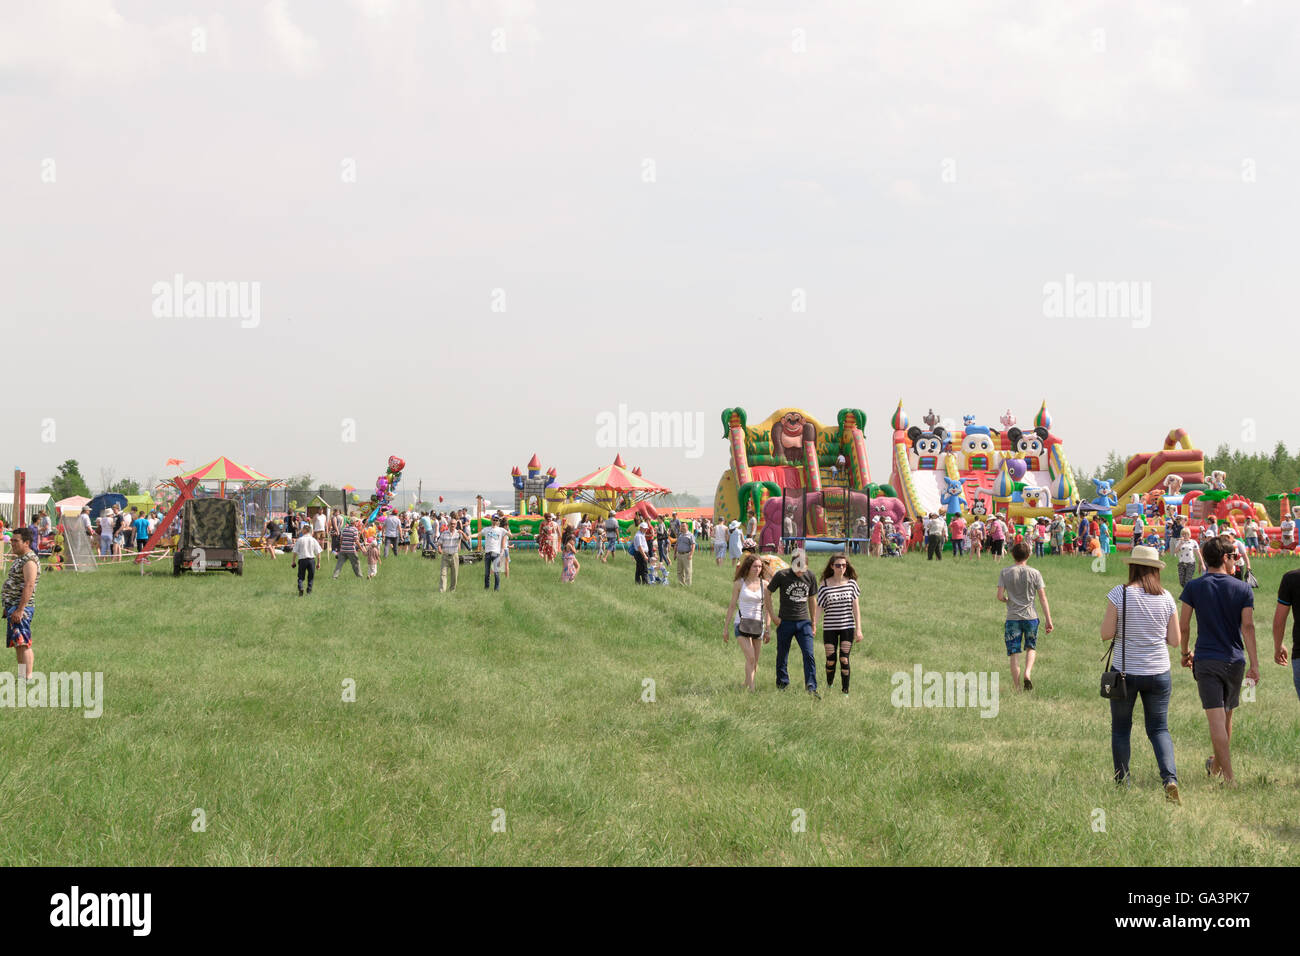 Crowd of people at an outdoor fun park in Russia Stock Photo